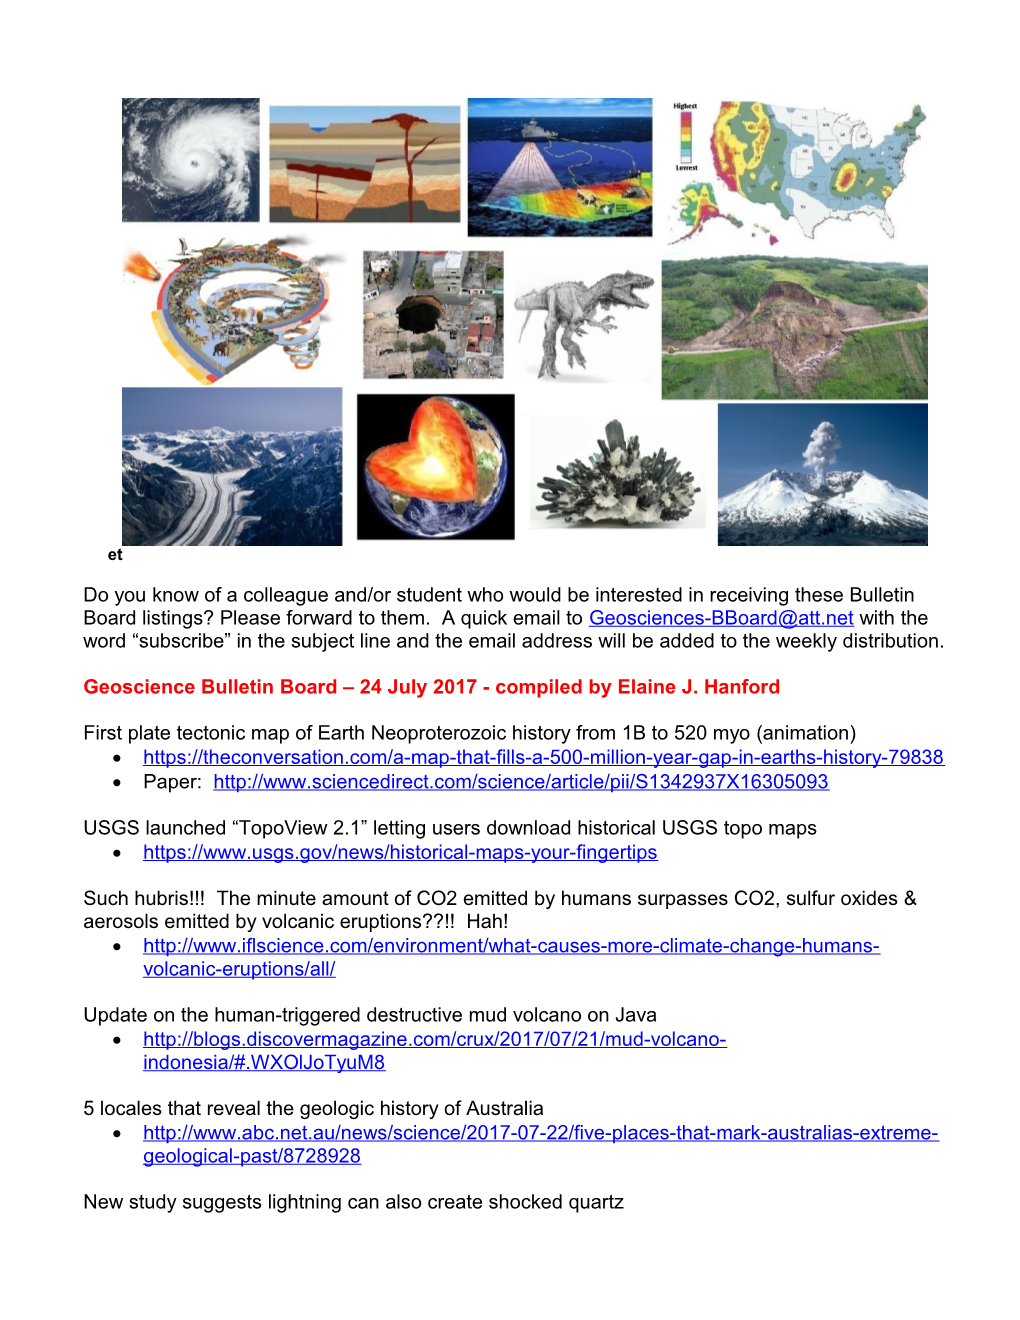 Geoscience Bulletin Board 24 July 2017- Compiled by Elaine J. Hanford